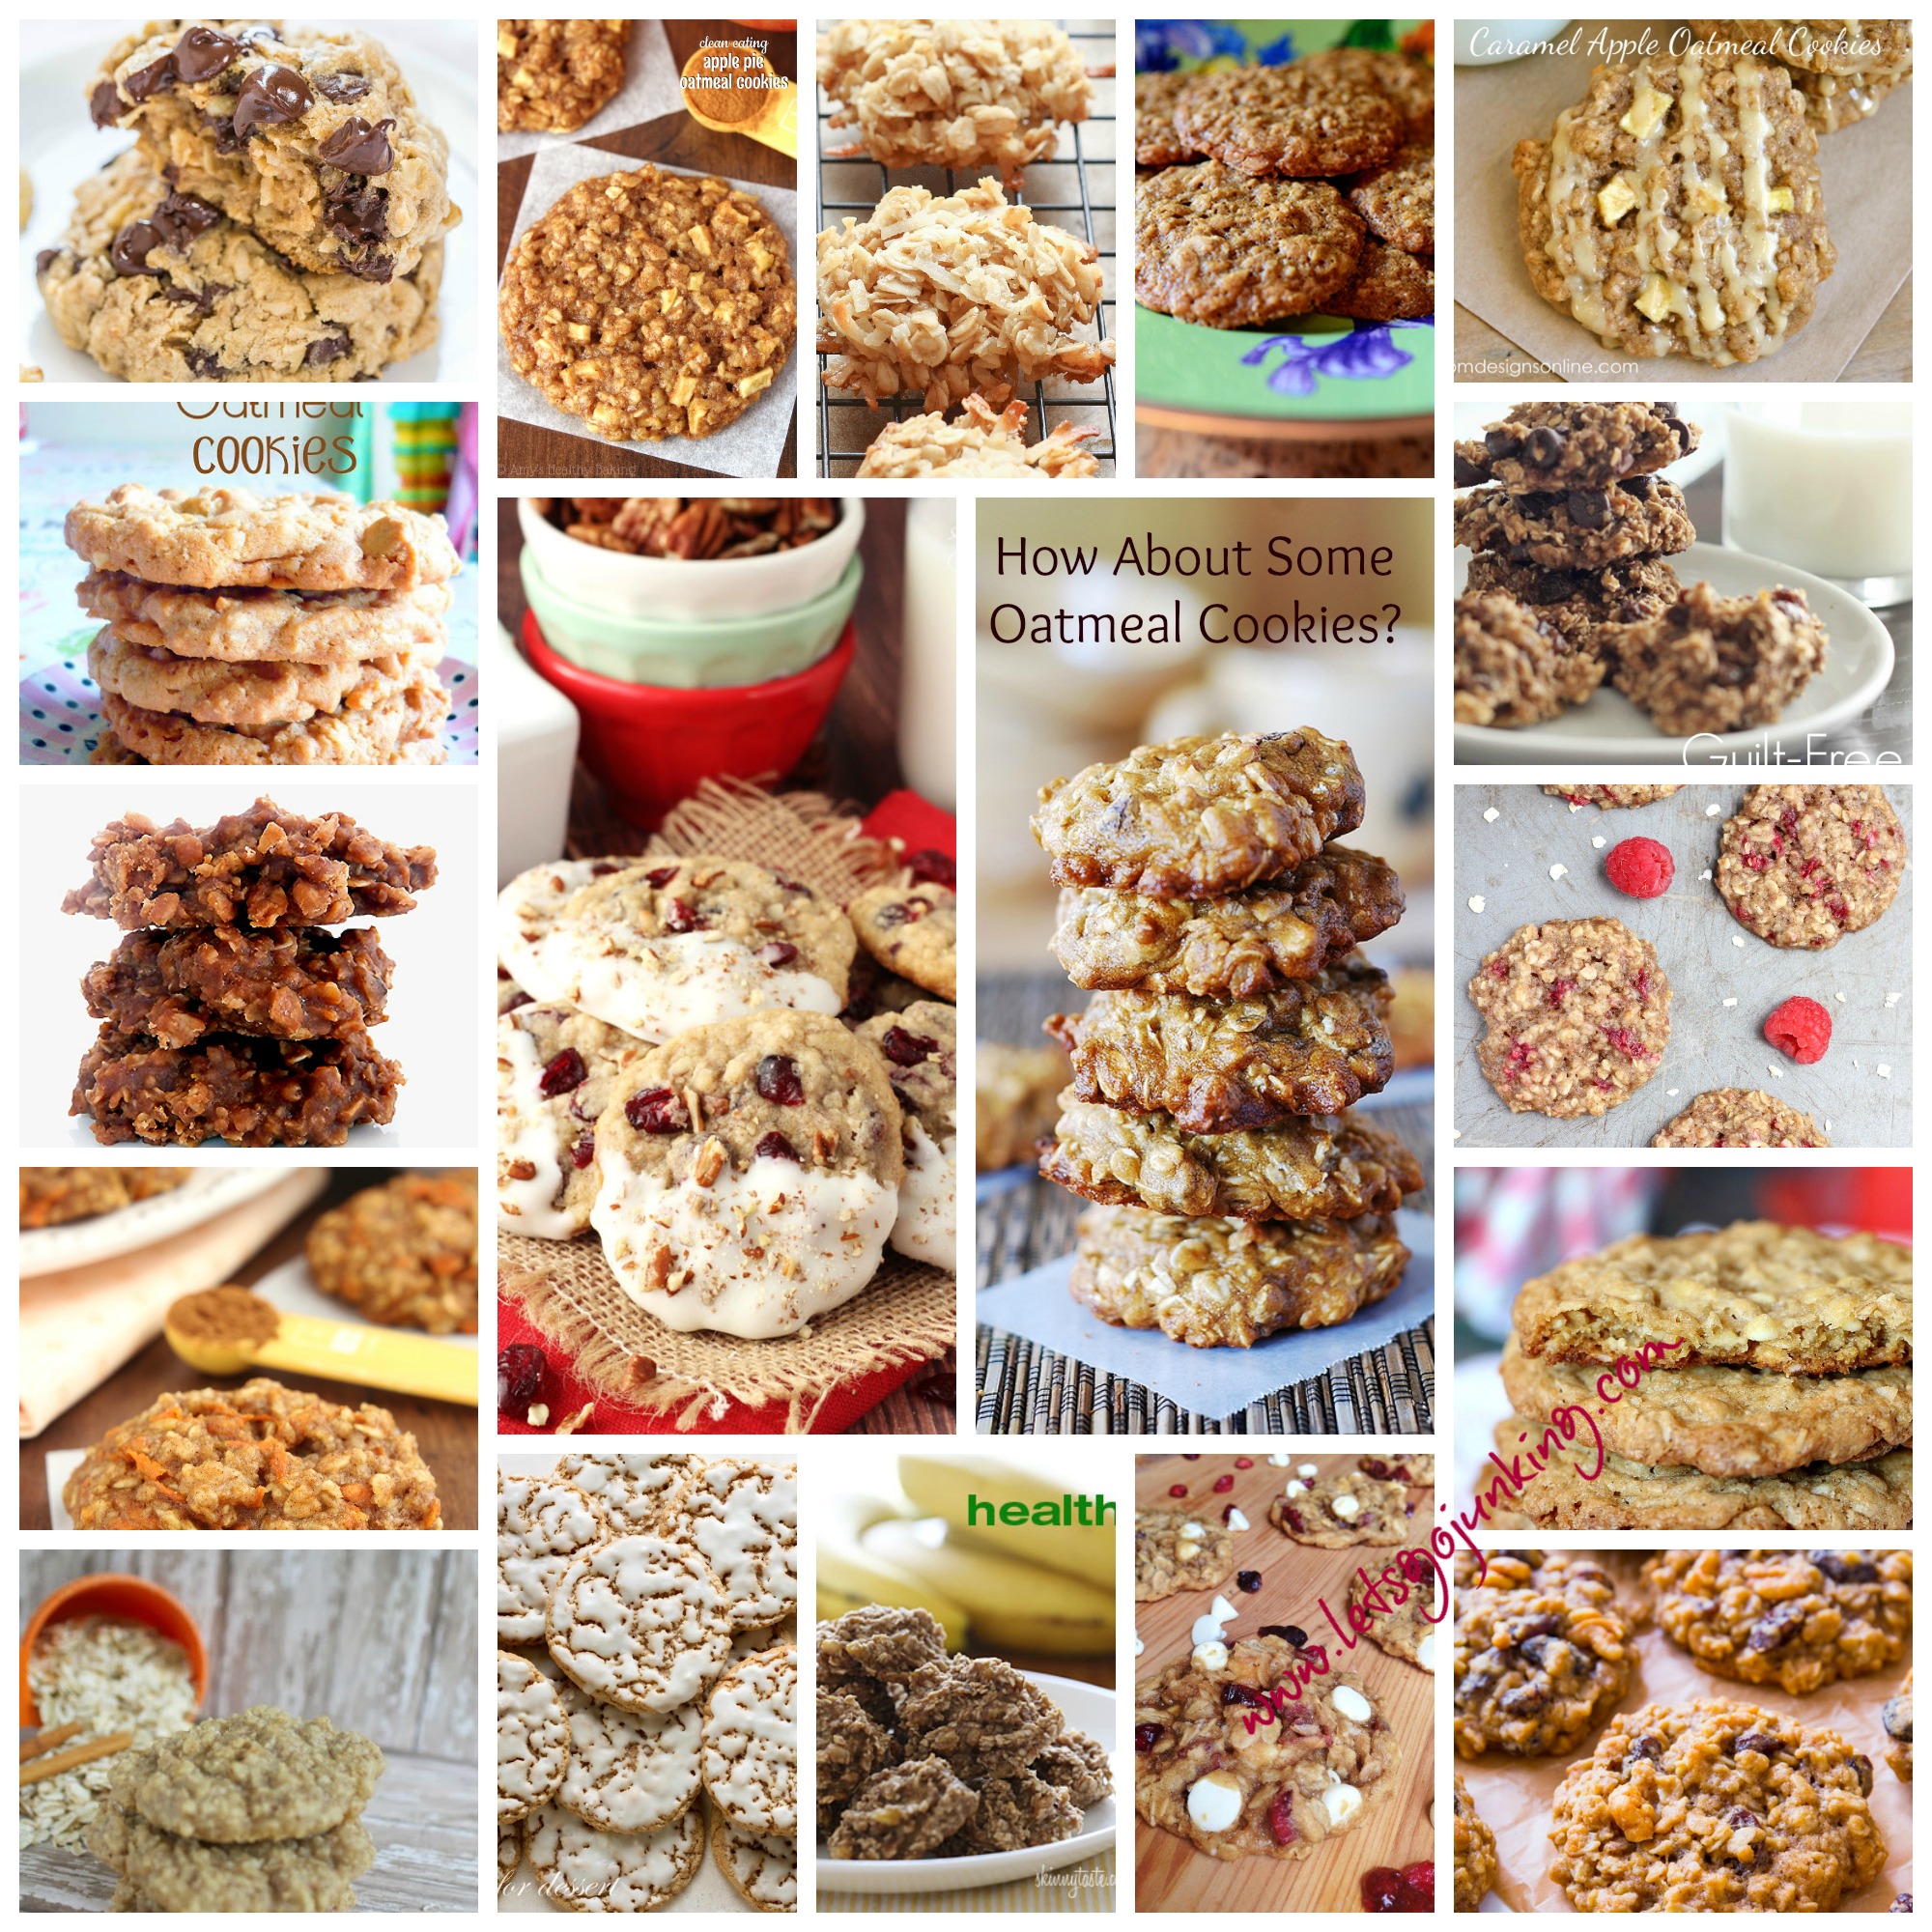 Oatmeal Cookies – The Last Day of National Oatmeal Month – Living Unfocused